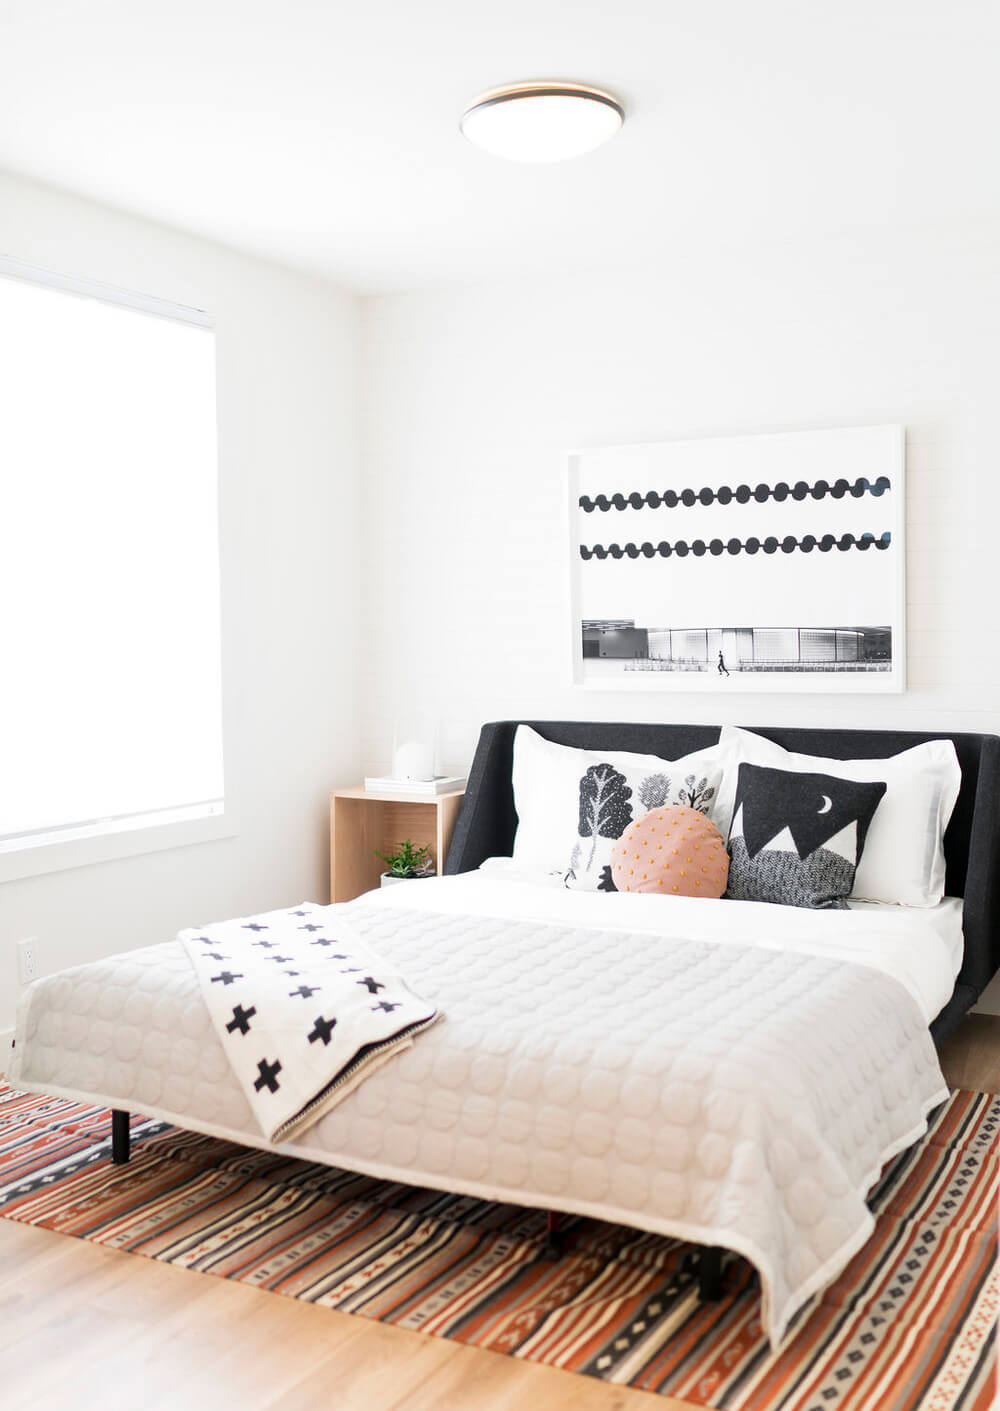 5 Trendy Bedroom Decor Ideas That Will Inspire You | Transform ...